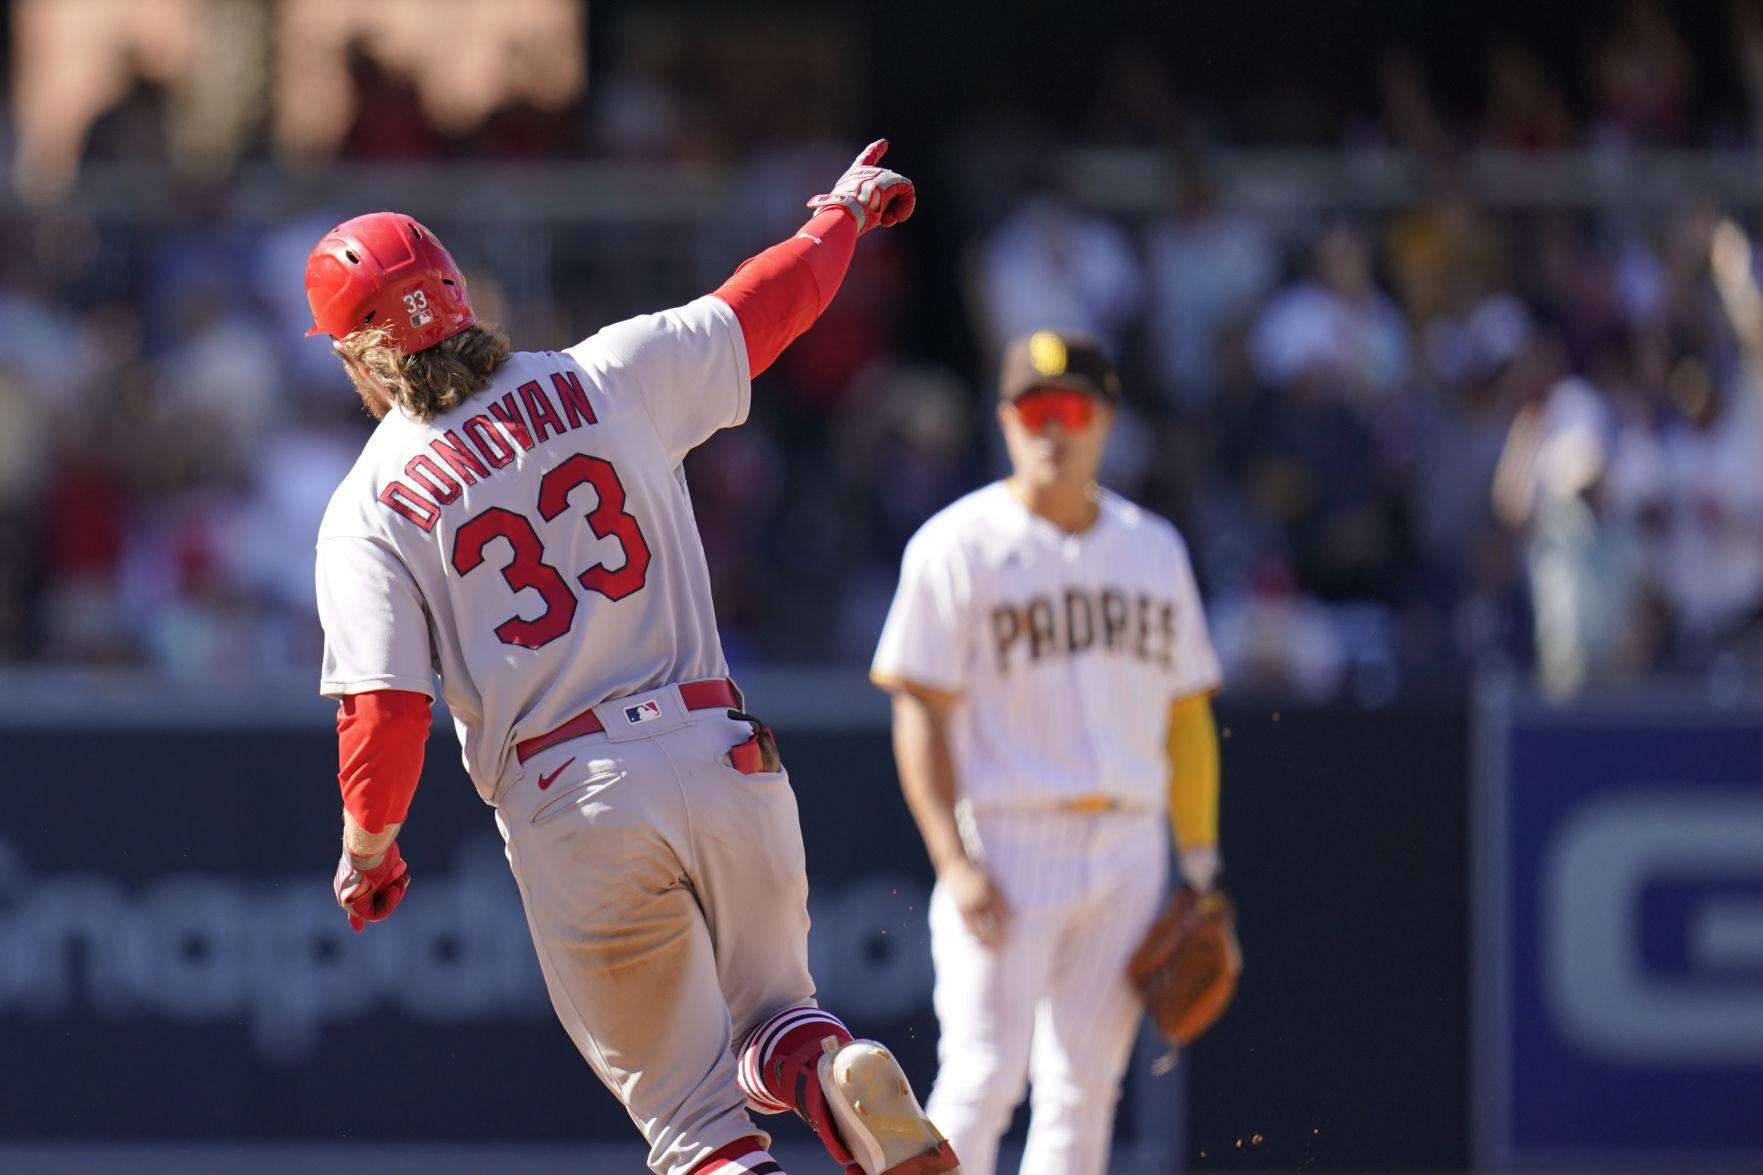 Donovan's grand slam carries Cardinals over Padres | Sports ...